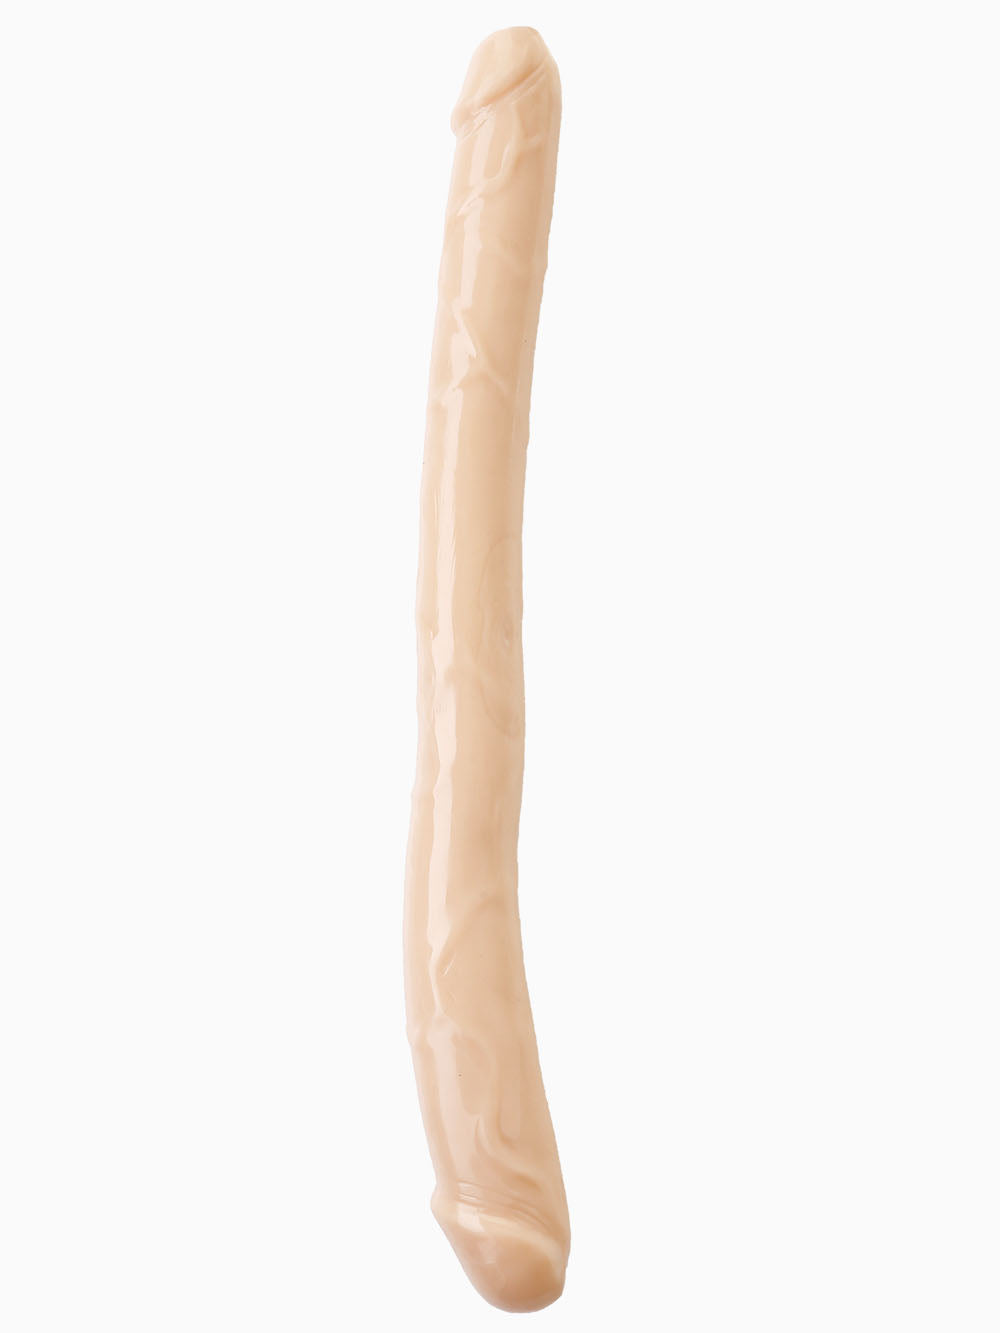 Pillow Talk Ultimate Dildo, 15.5 Inches, Nude